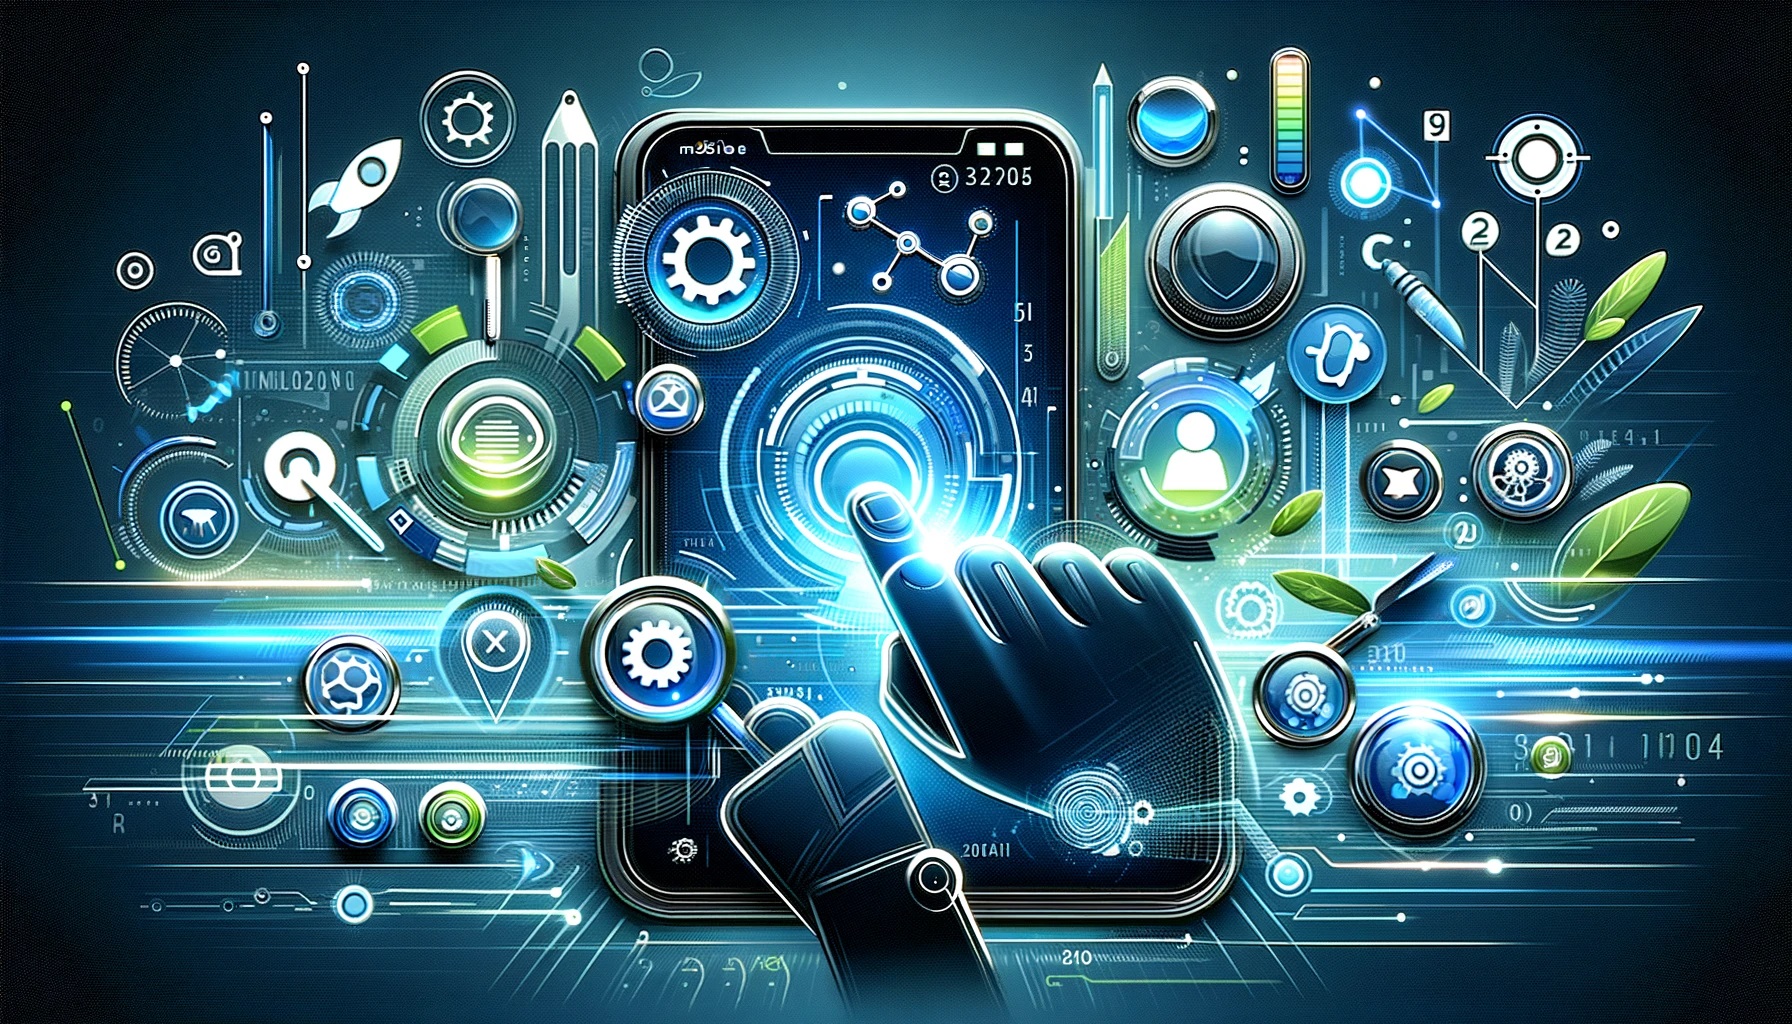 This image captures the essence of mobile SEO in 2024 with a range of futuristic elements. It showcases a hand interacting with a dynamic smartphone interface, surrounded by abstract icons that symbolize optimization and search, such as magnifying glasses and gear wheels. The design is ultramodern, featuring a color palette of blues, greens, and neon accents that evoke a sense of innovation and digital connectivity. It reflects a world where technology and SEO seamlessly intersect in the palm of your hand.